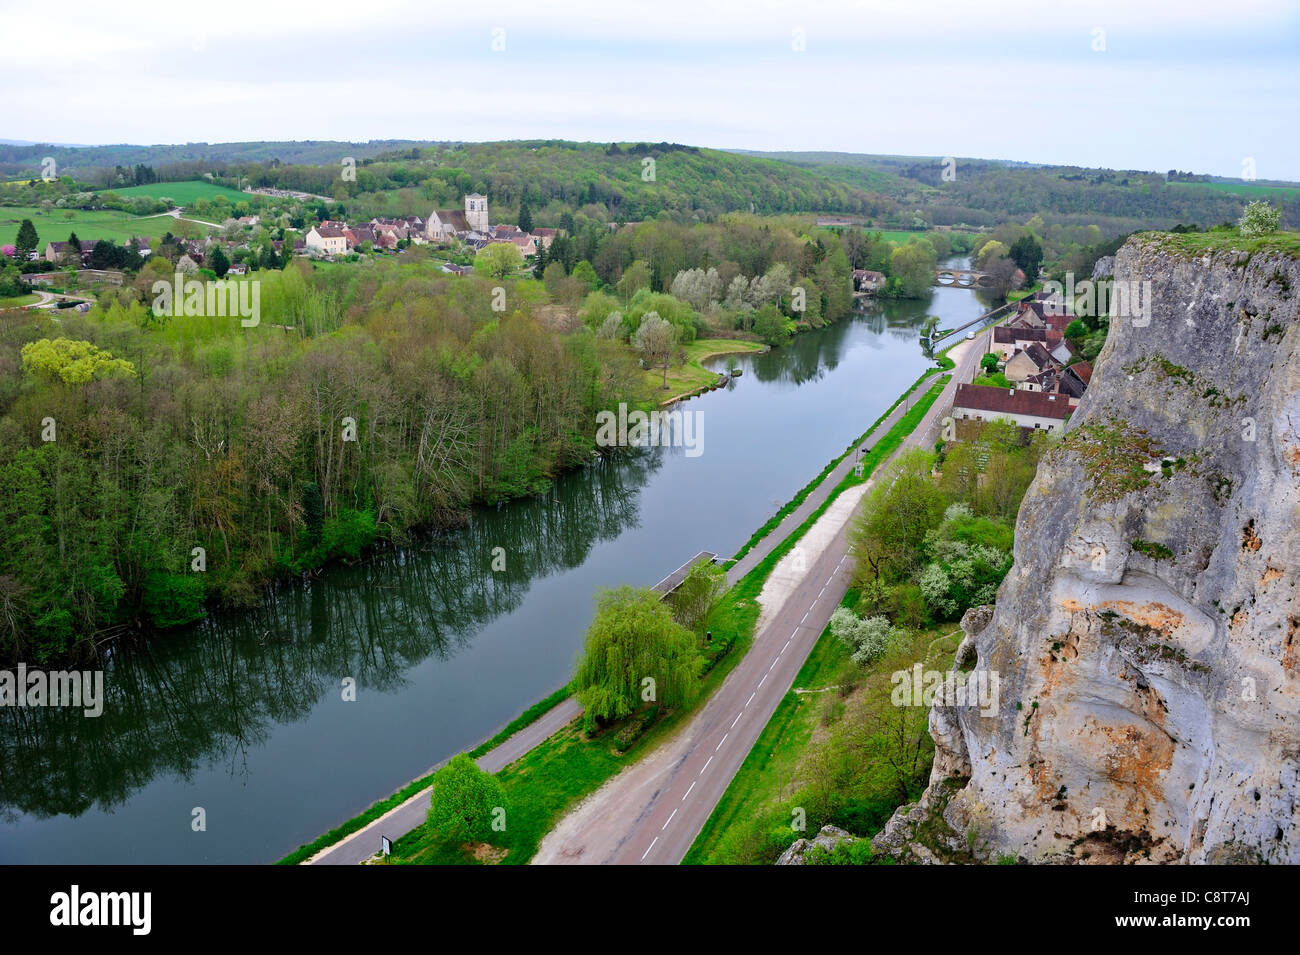 The village of Merry sur Yonne and River Yonne in Burgundy. France. Taken from the top of the Rochers du Saussois Stock Photo